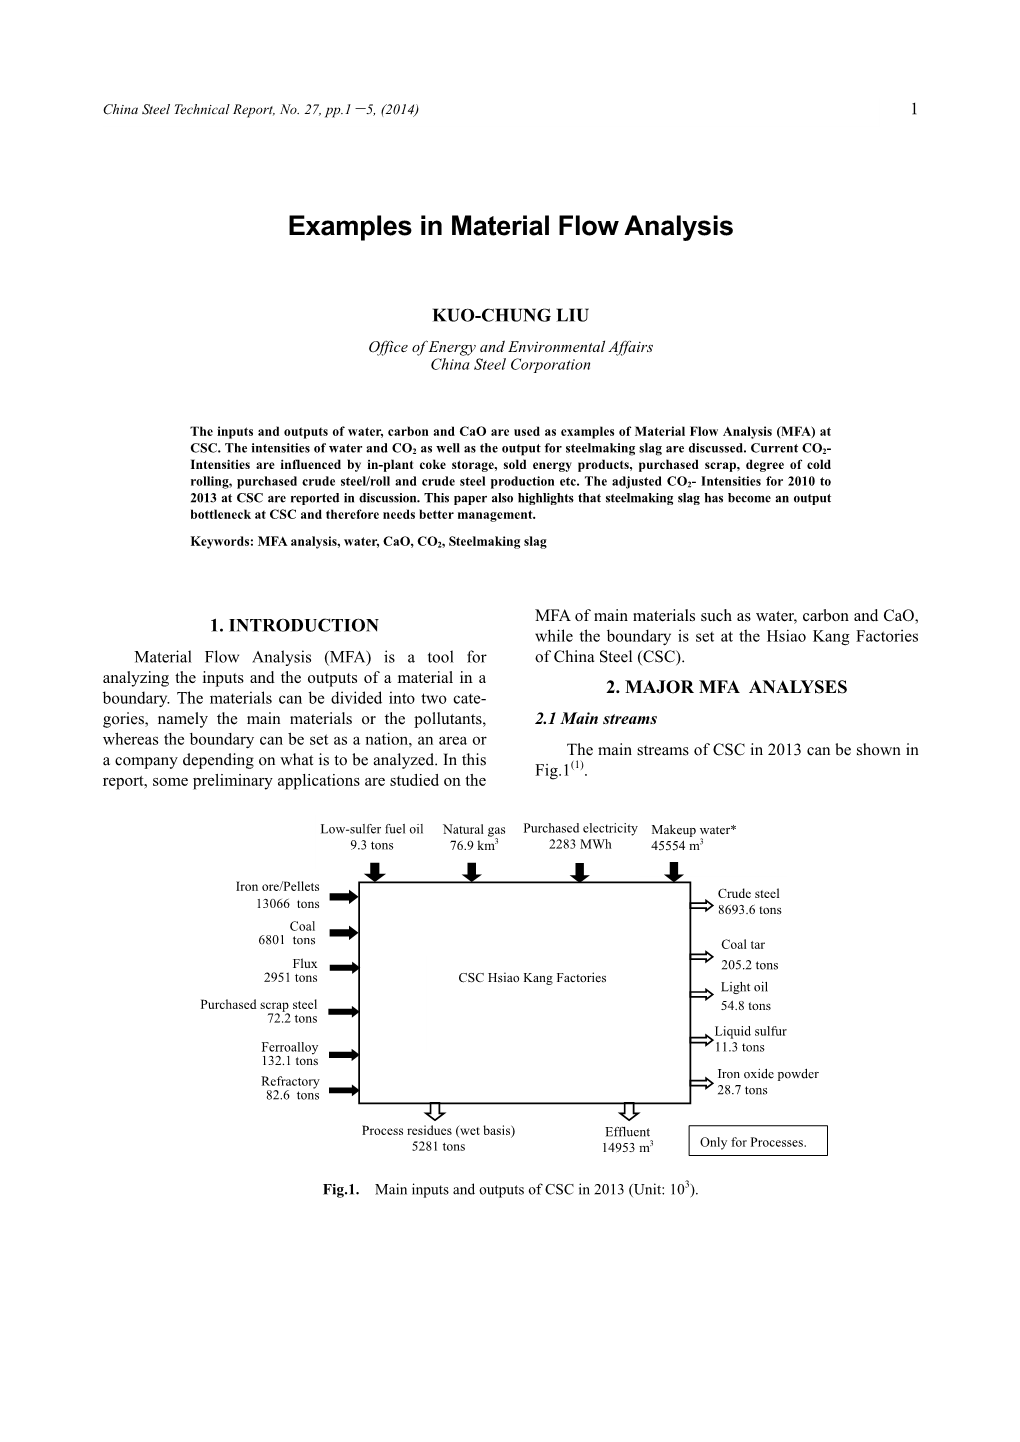 Examples in Material Flow Analysis